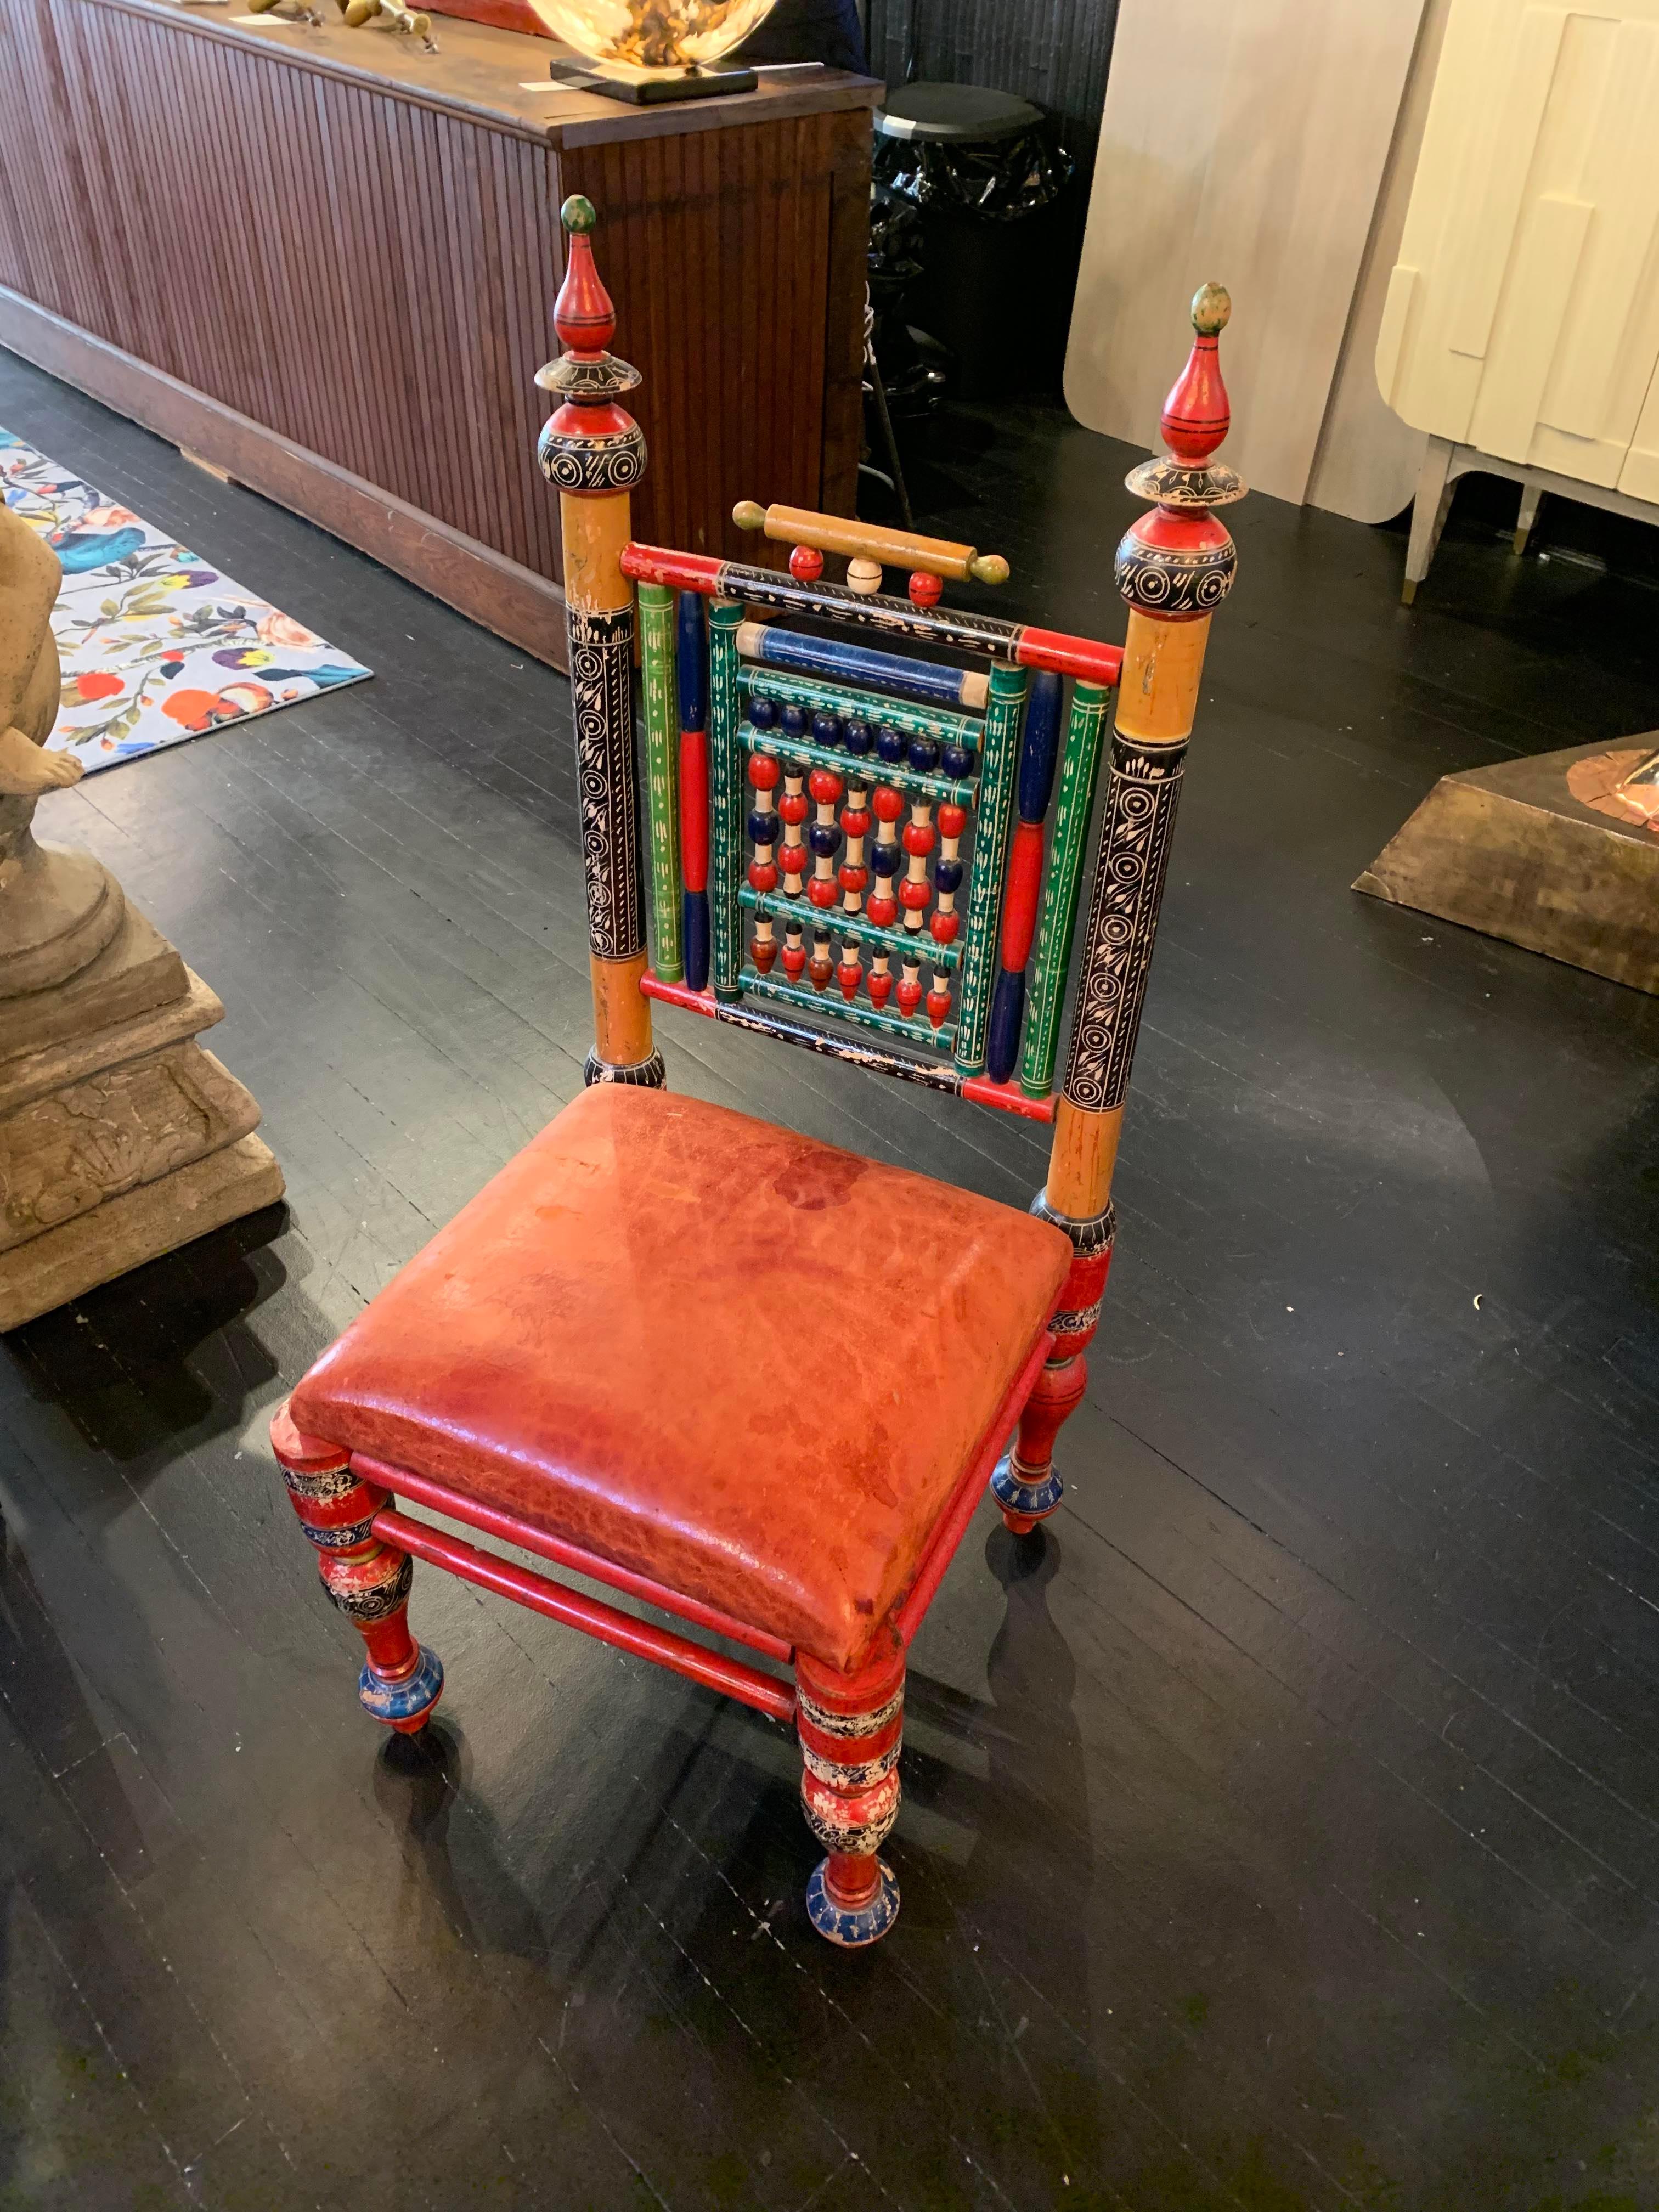 Rare set of six antique handcrafted matching Punjabi style wooden tribal chairs with original vibrant paint and aged red leather seats. Indian or Pakistani design representative of Punjabi wedding chairs but a full set of six identical chairs